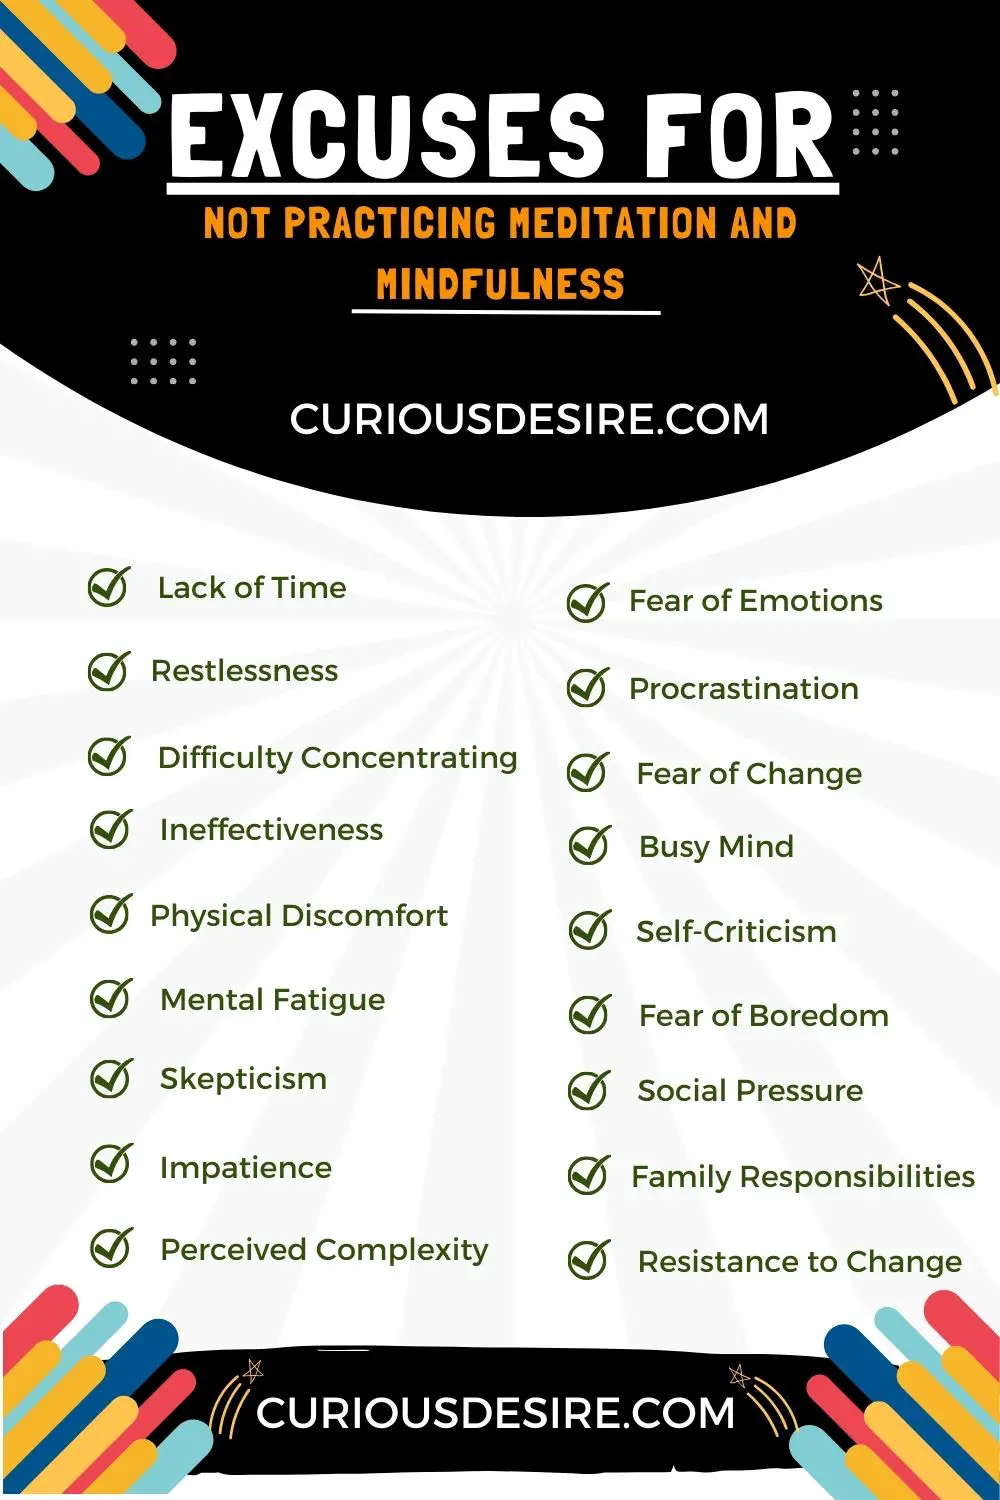 Top 30 Excuses for Not Practicing Meditation and Mindfulness